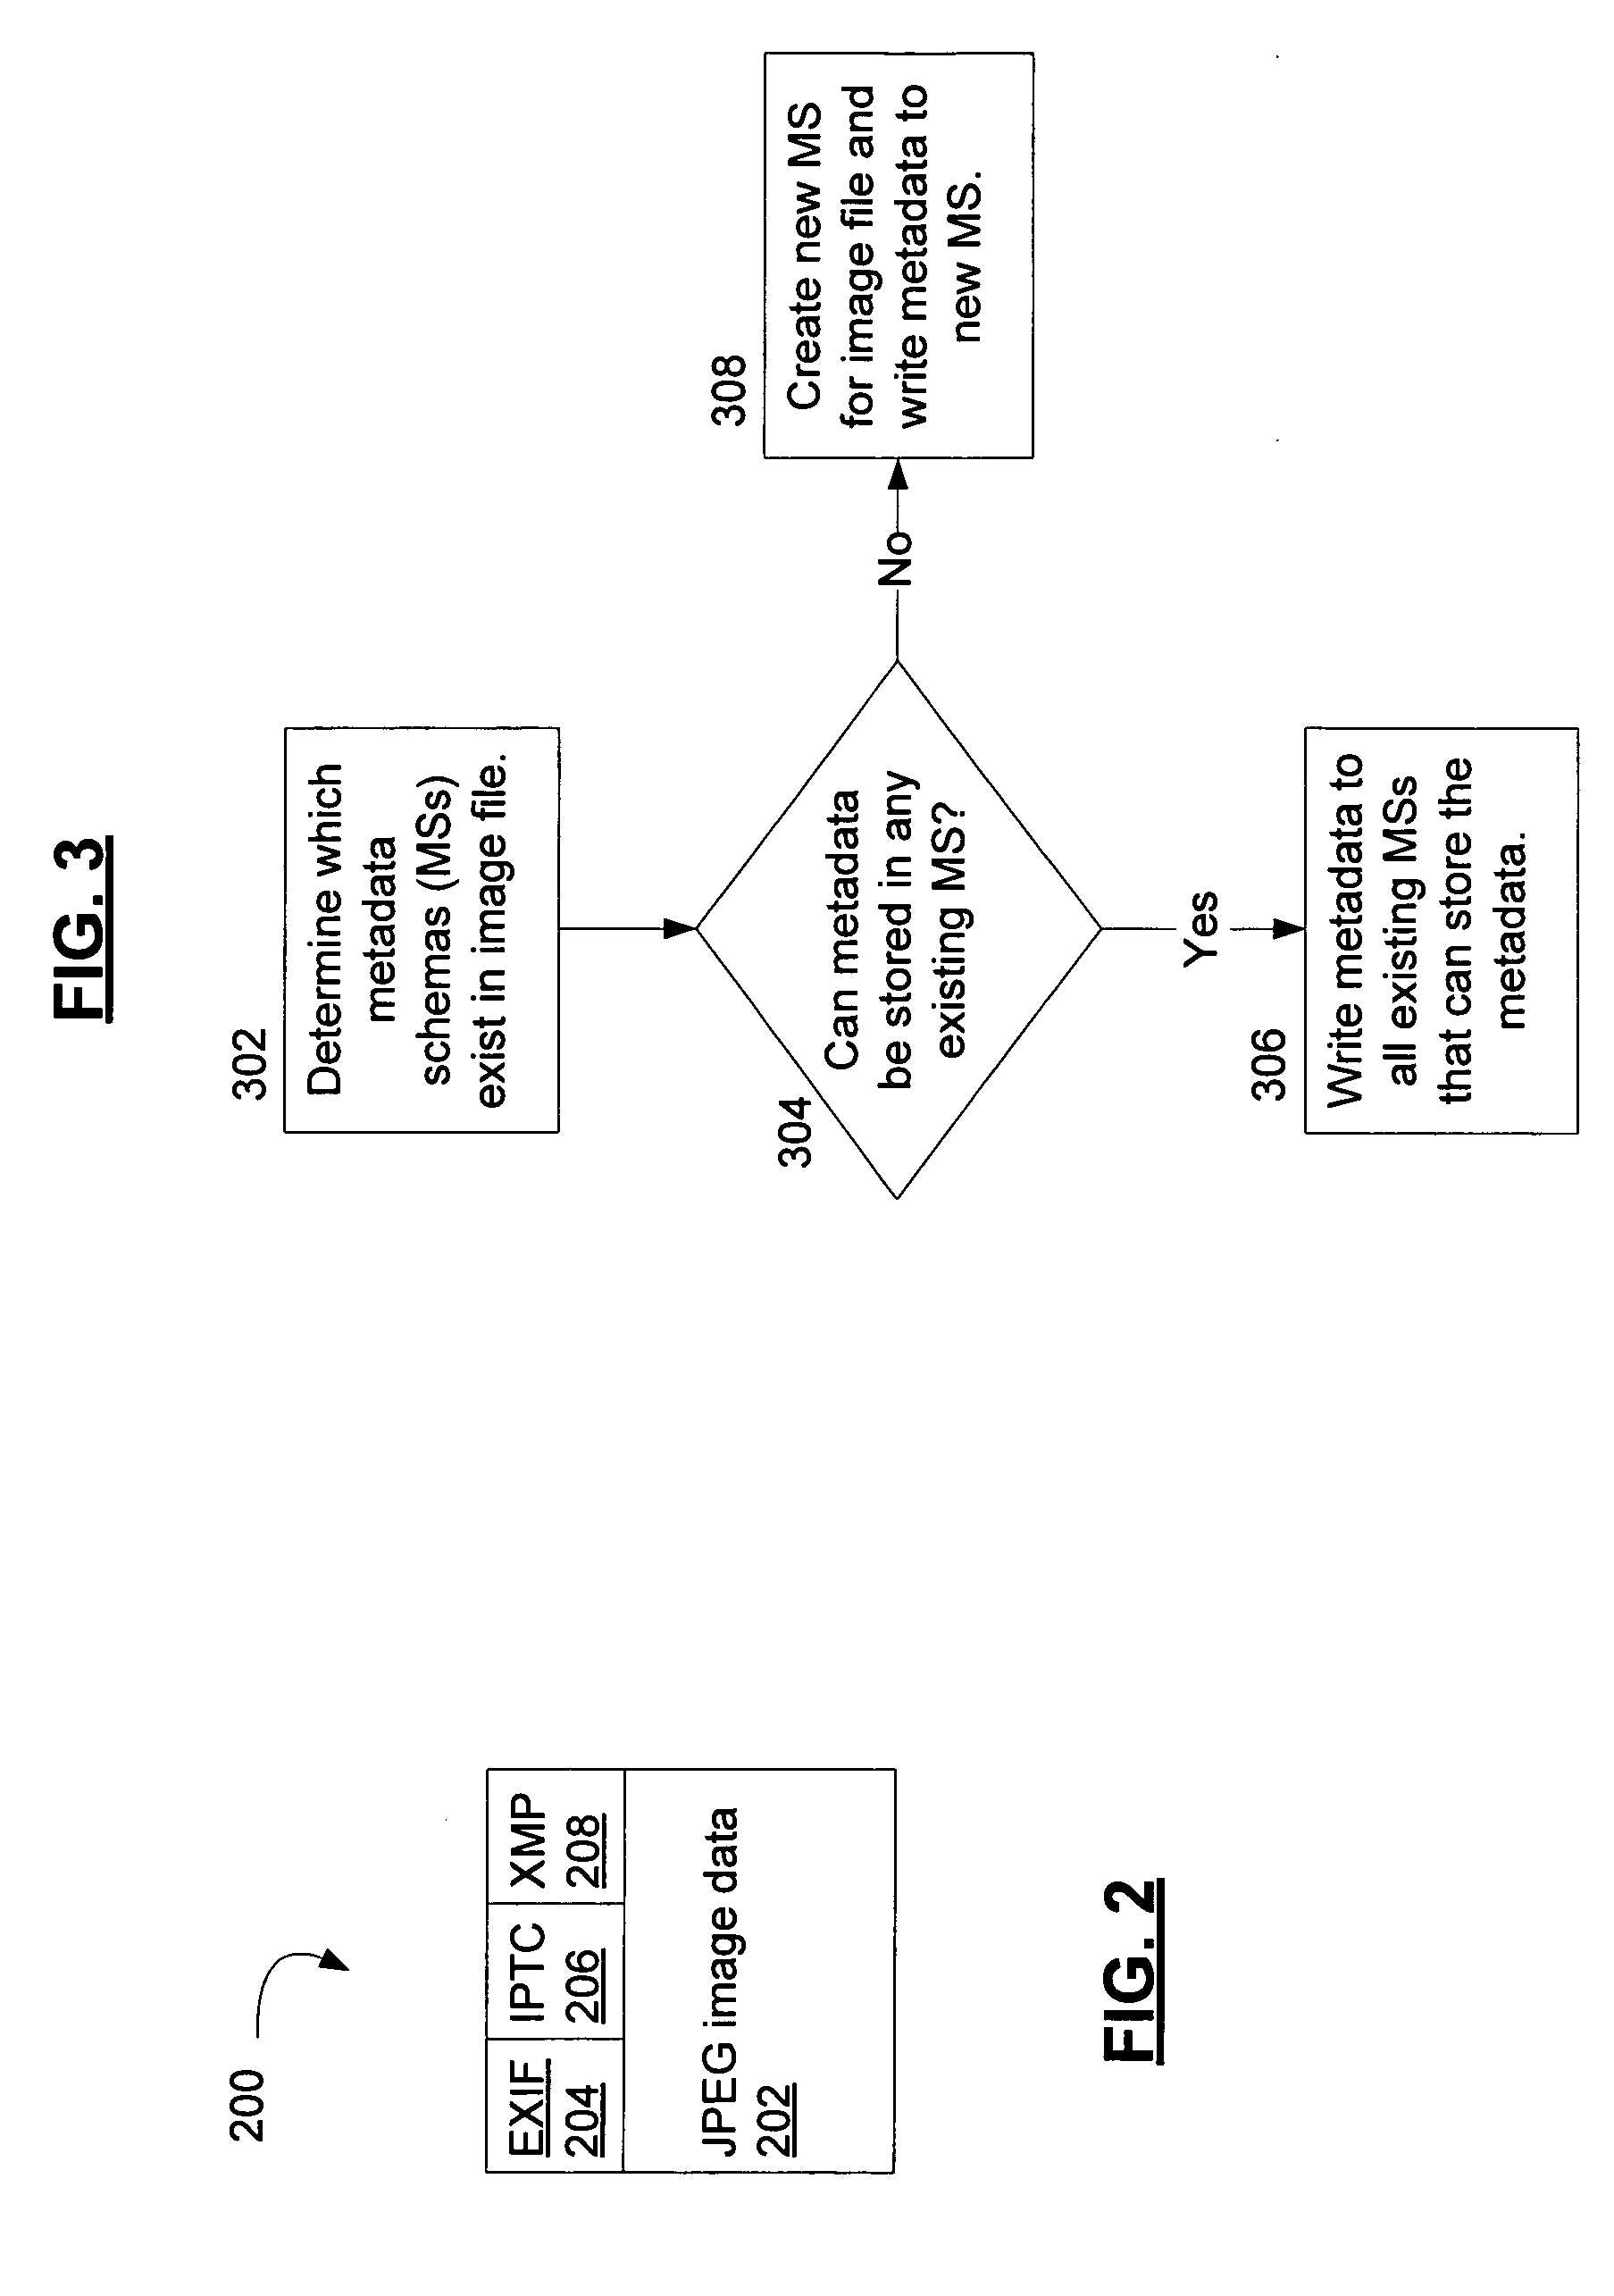 Systems and methods for reconciling image metadata